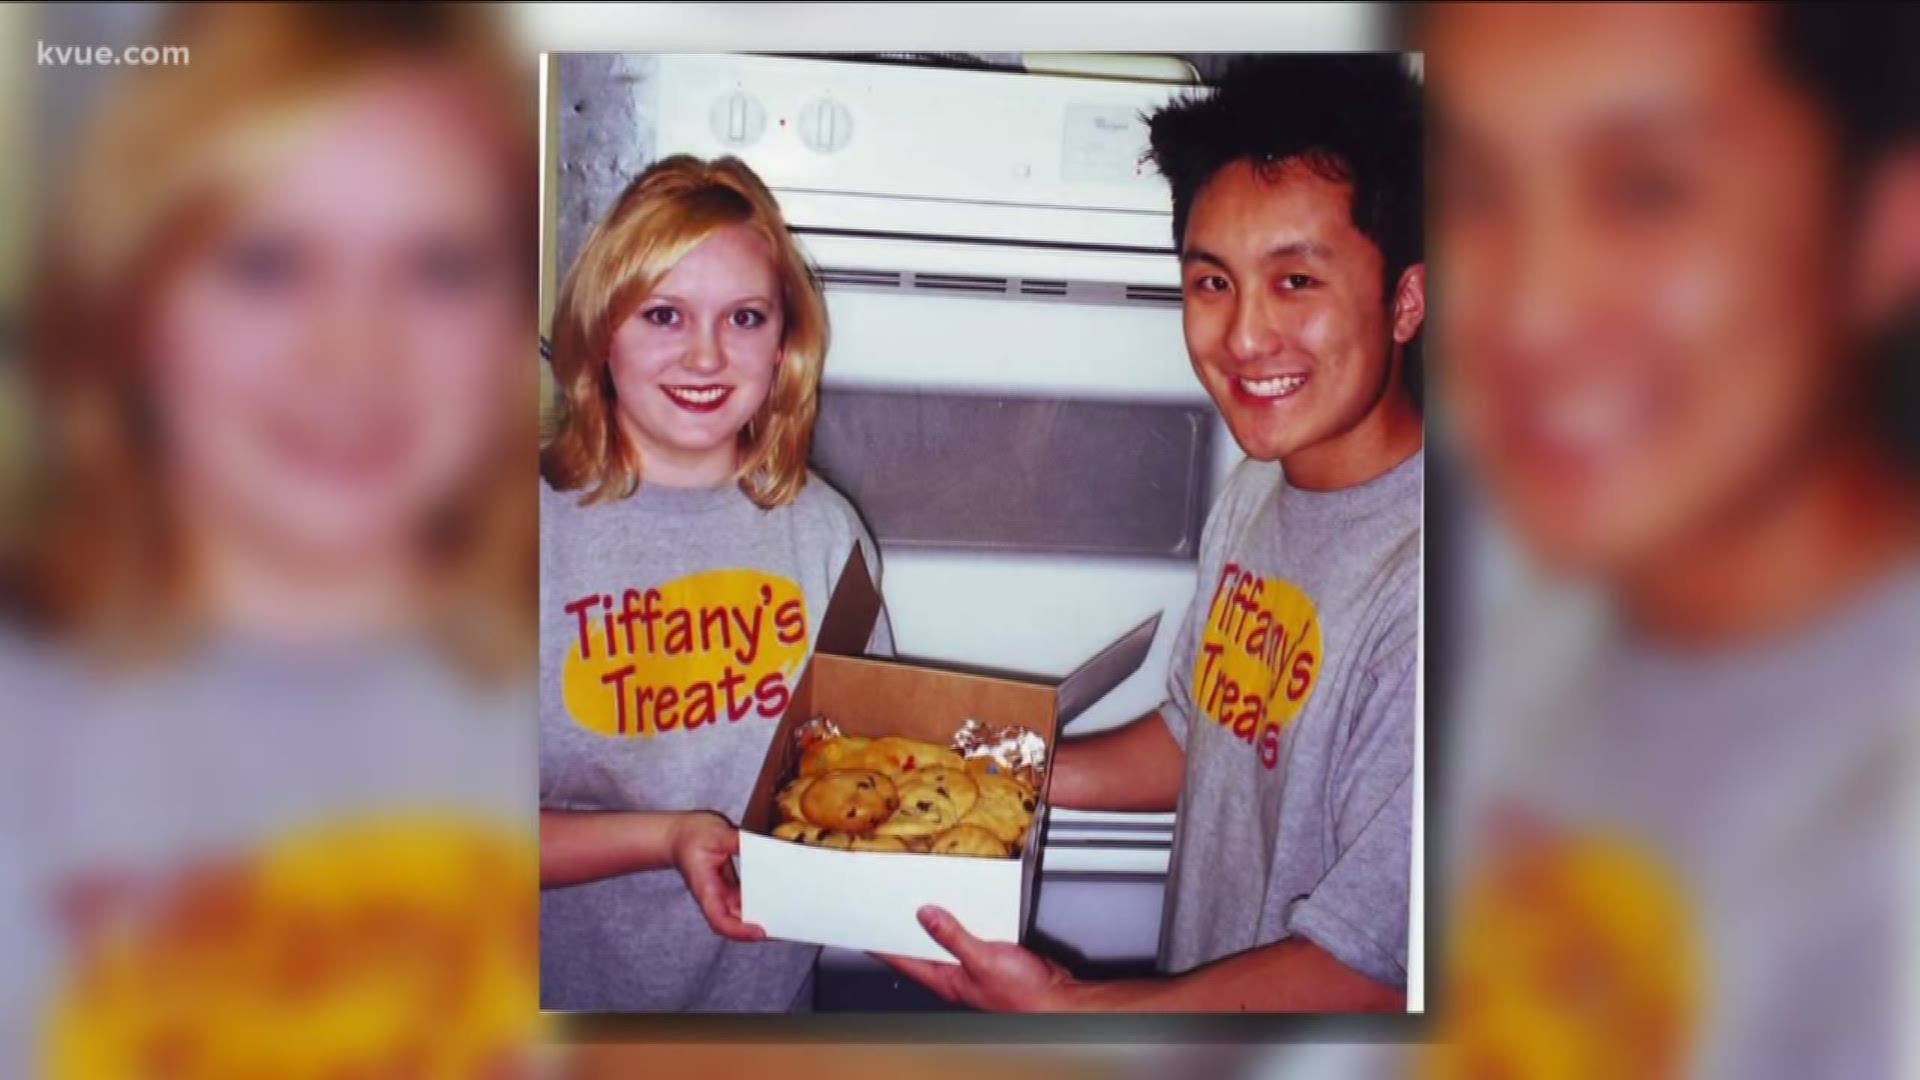 Twenty dollars, a cell phone and a dream - that's how one of the most popular Austin-based companies got its start.

But the real story behind Tiff's Treats' success is actually the sweetest love story in Austin.
STORY: http://www.kvue.com/news/local/tiff